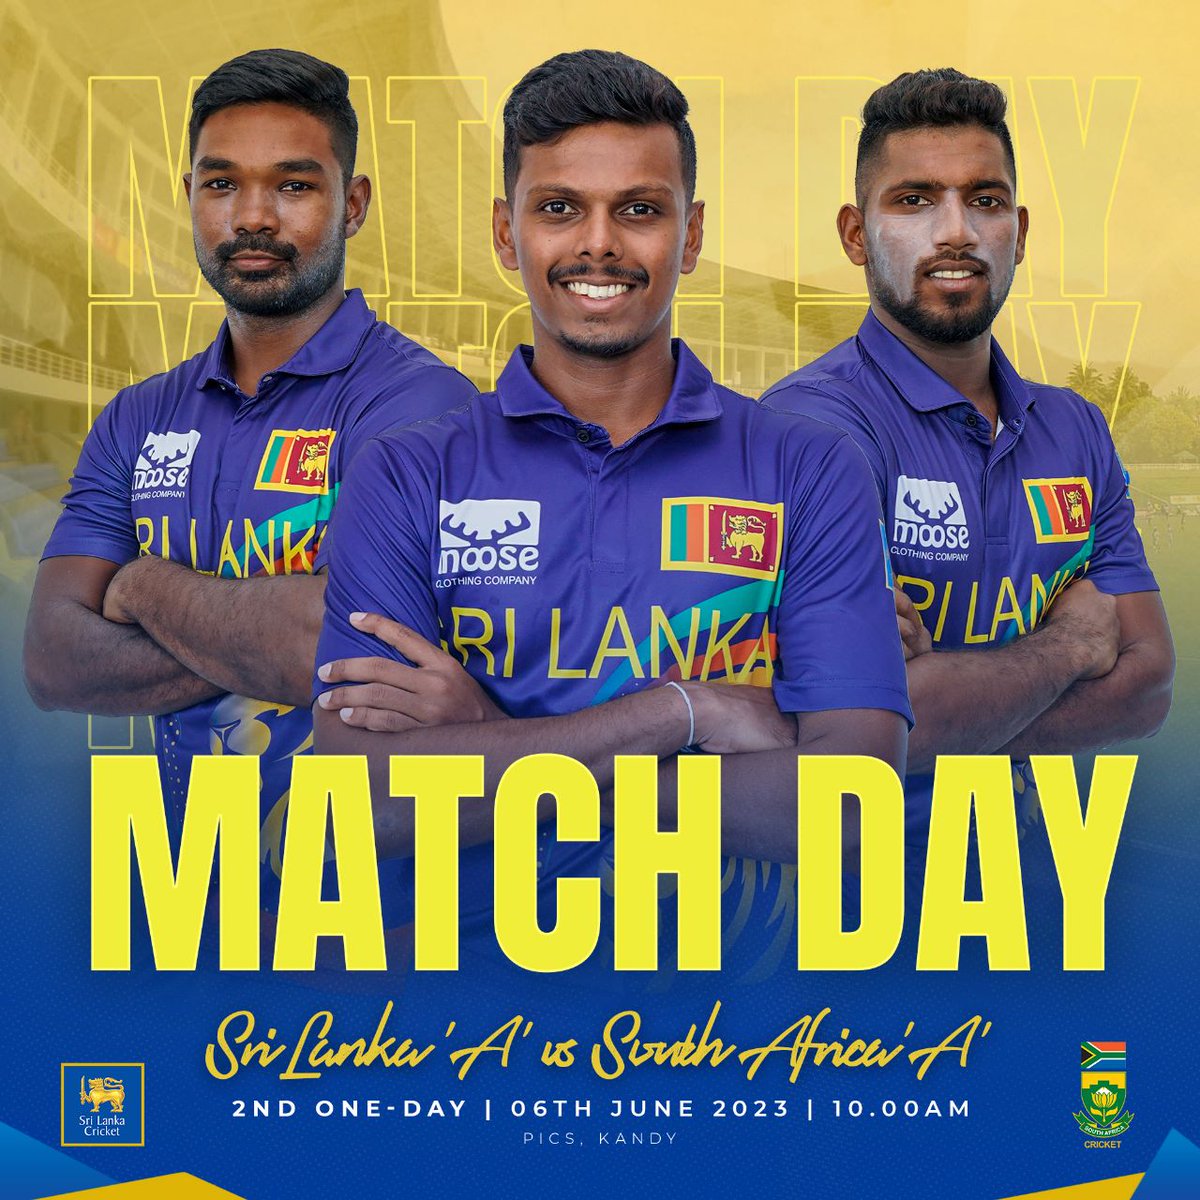 It's matchday in Kandy! 2nd One day will start at 10:00 AM!

#SLvSA